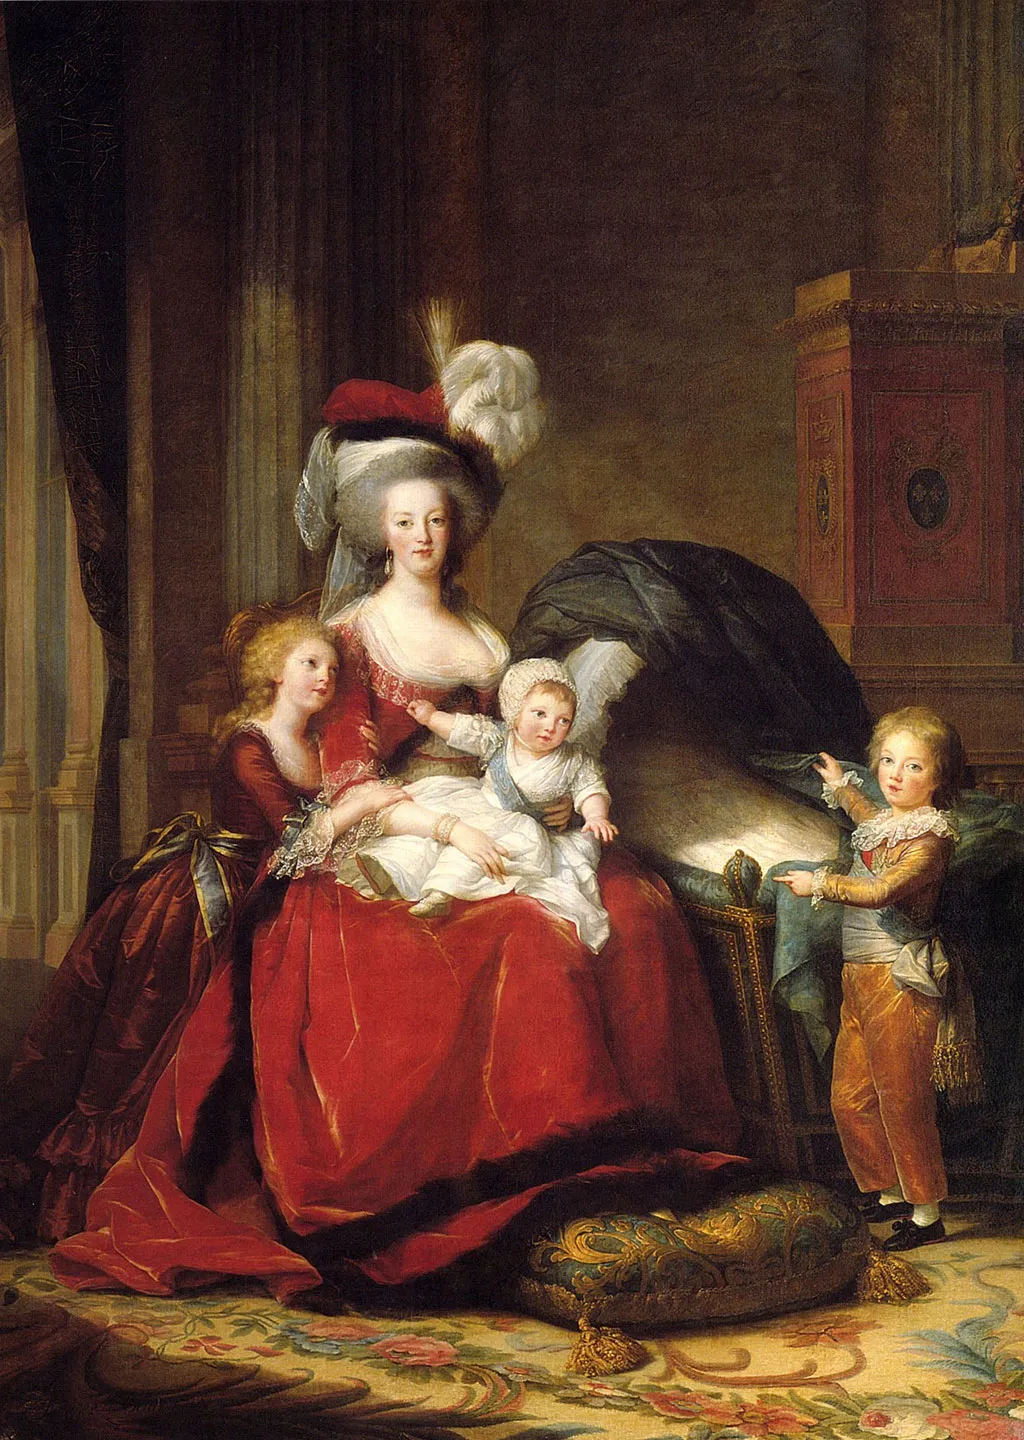 A 1787 portrait of Marie Antoinette and her three surviving children